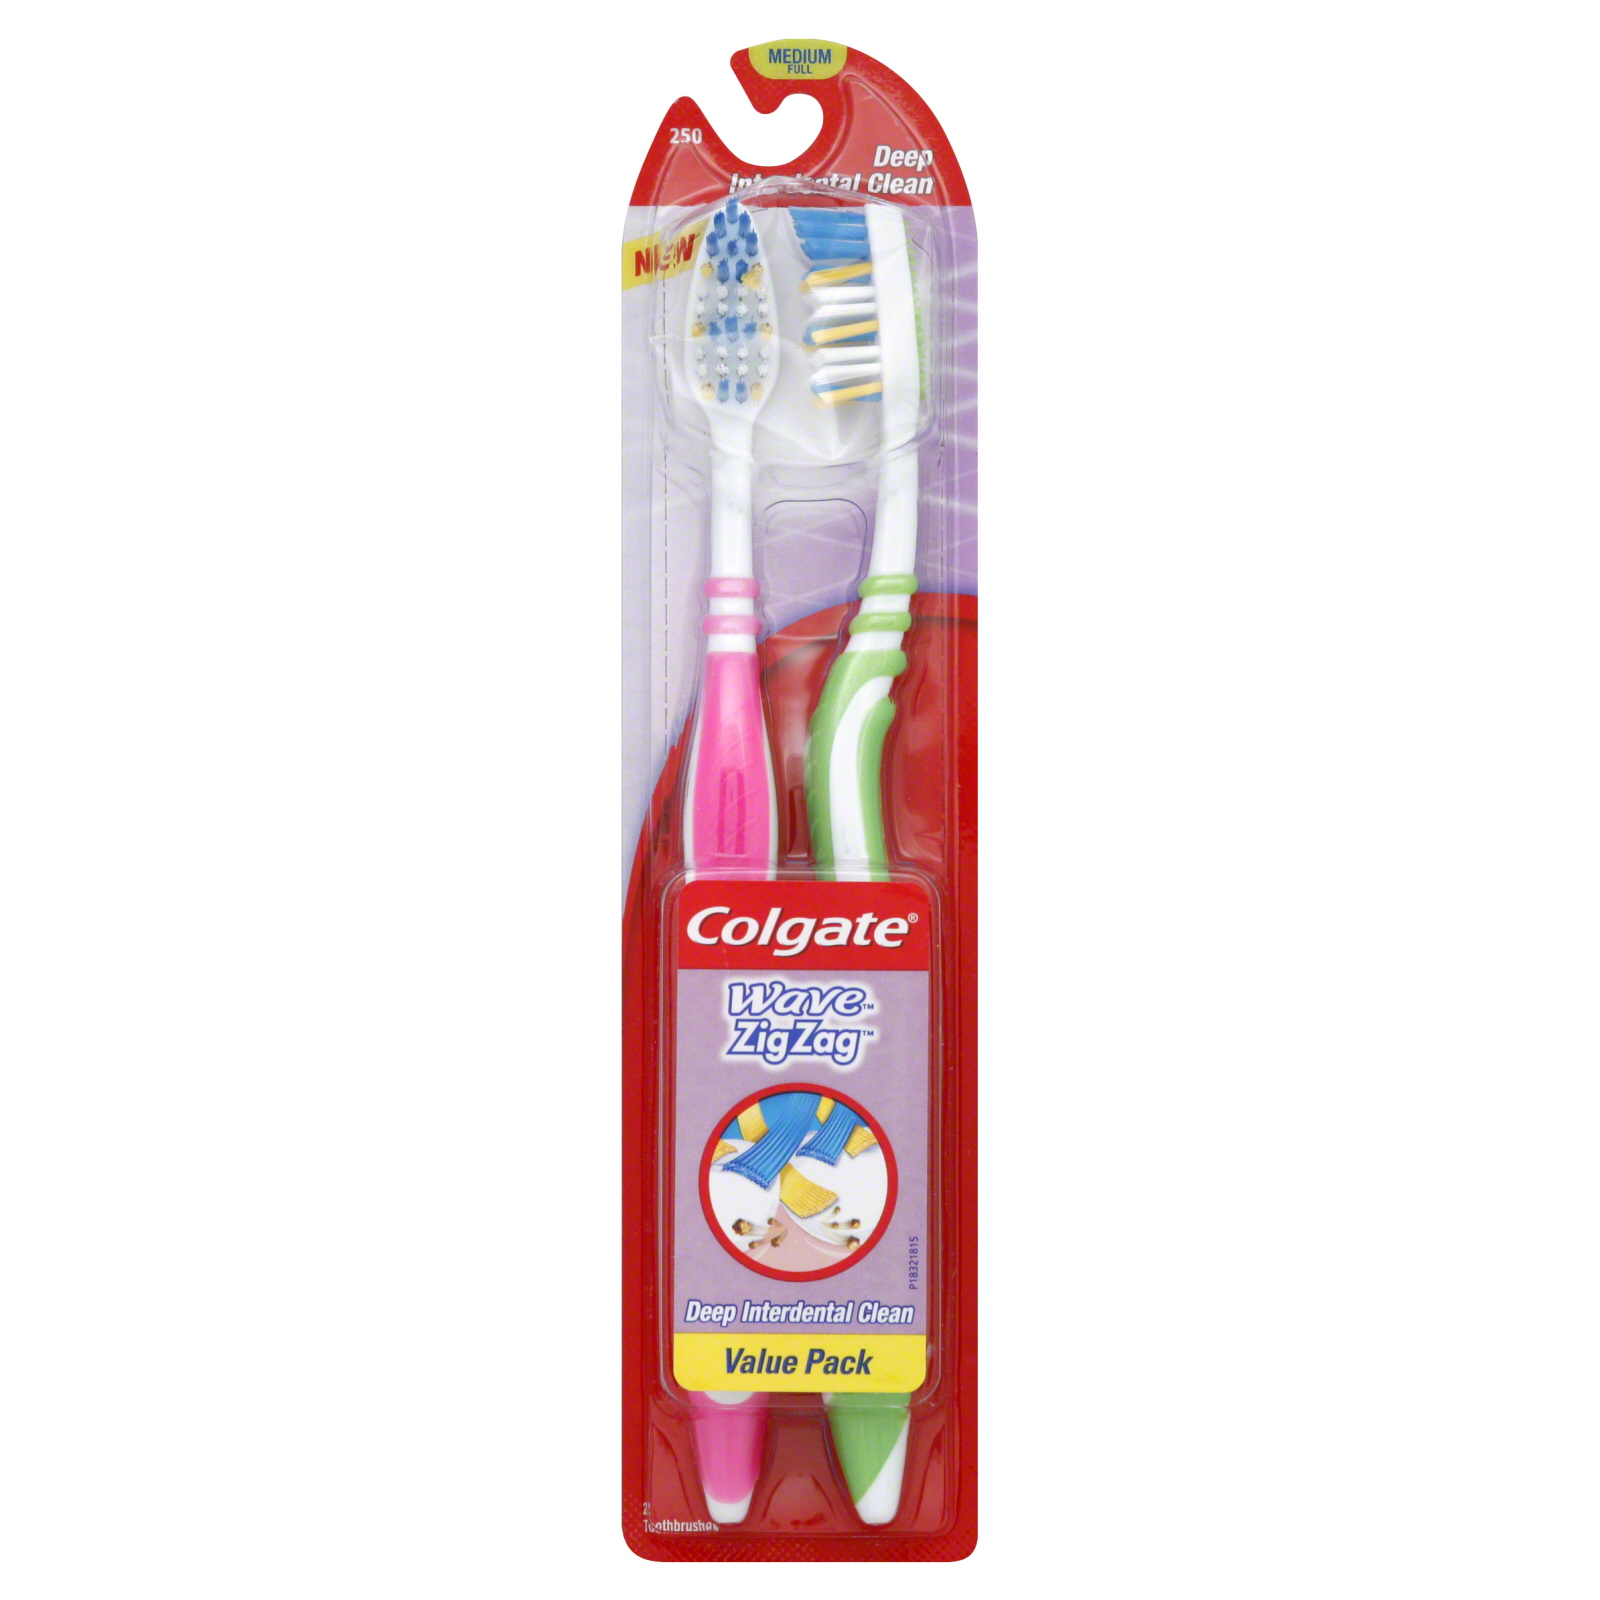 Colgate-Palmolive Wave Toothbrushes, Full Head, Medium 250, Value Pack, 2 toothbrushes